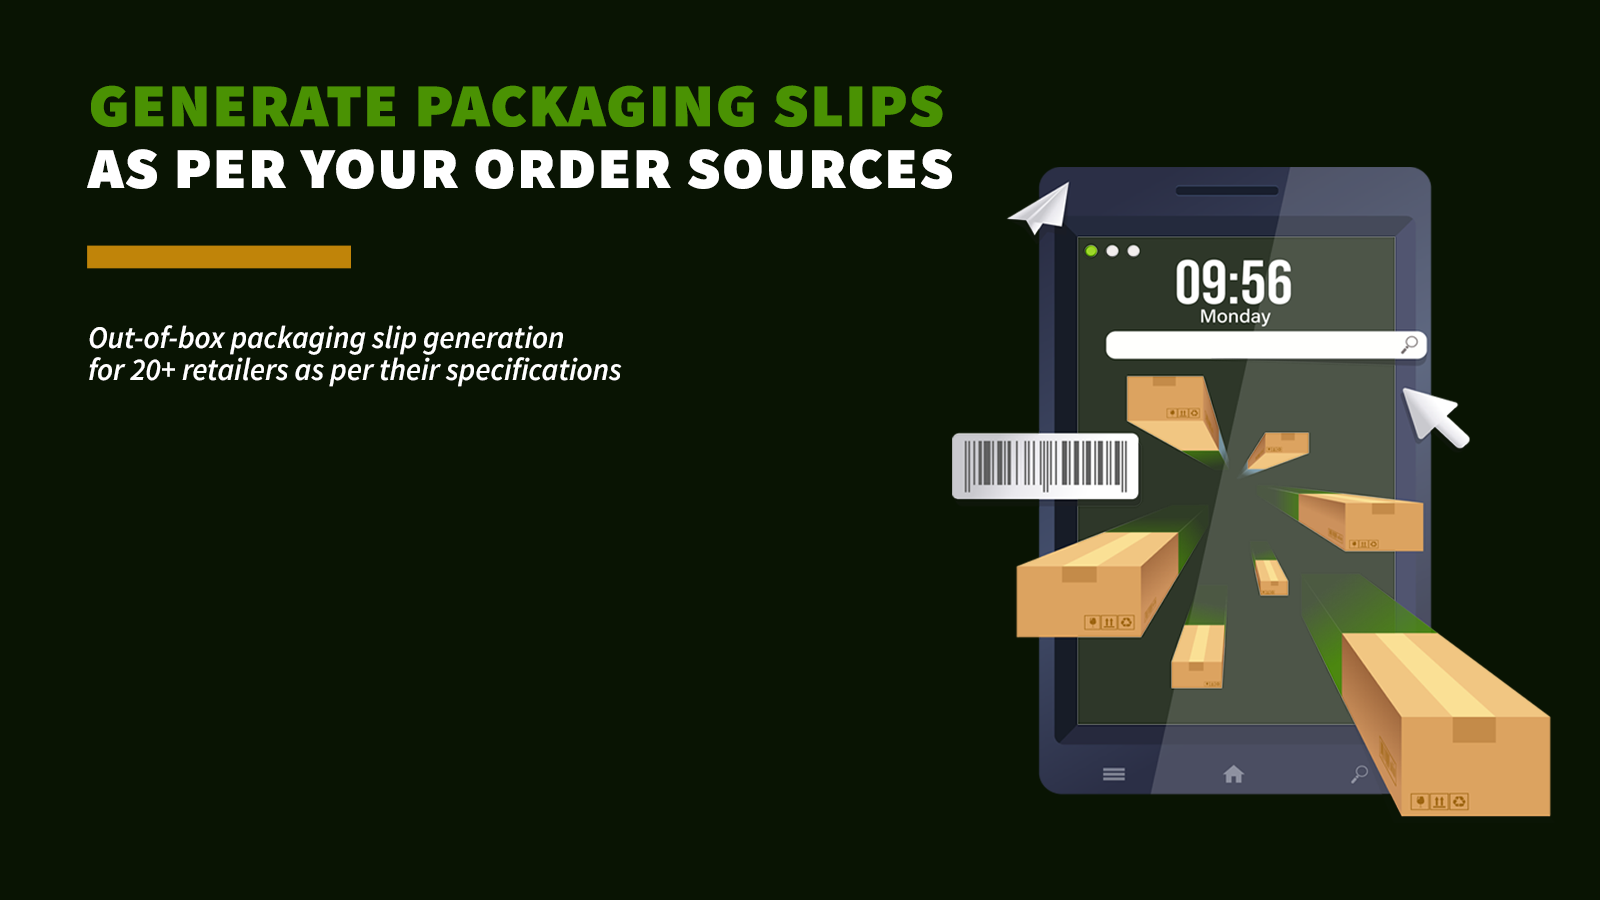 Generate packaging slips as per your order sources